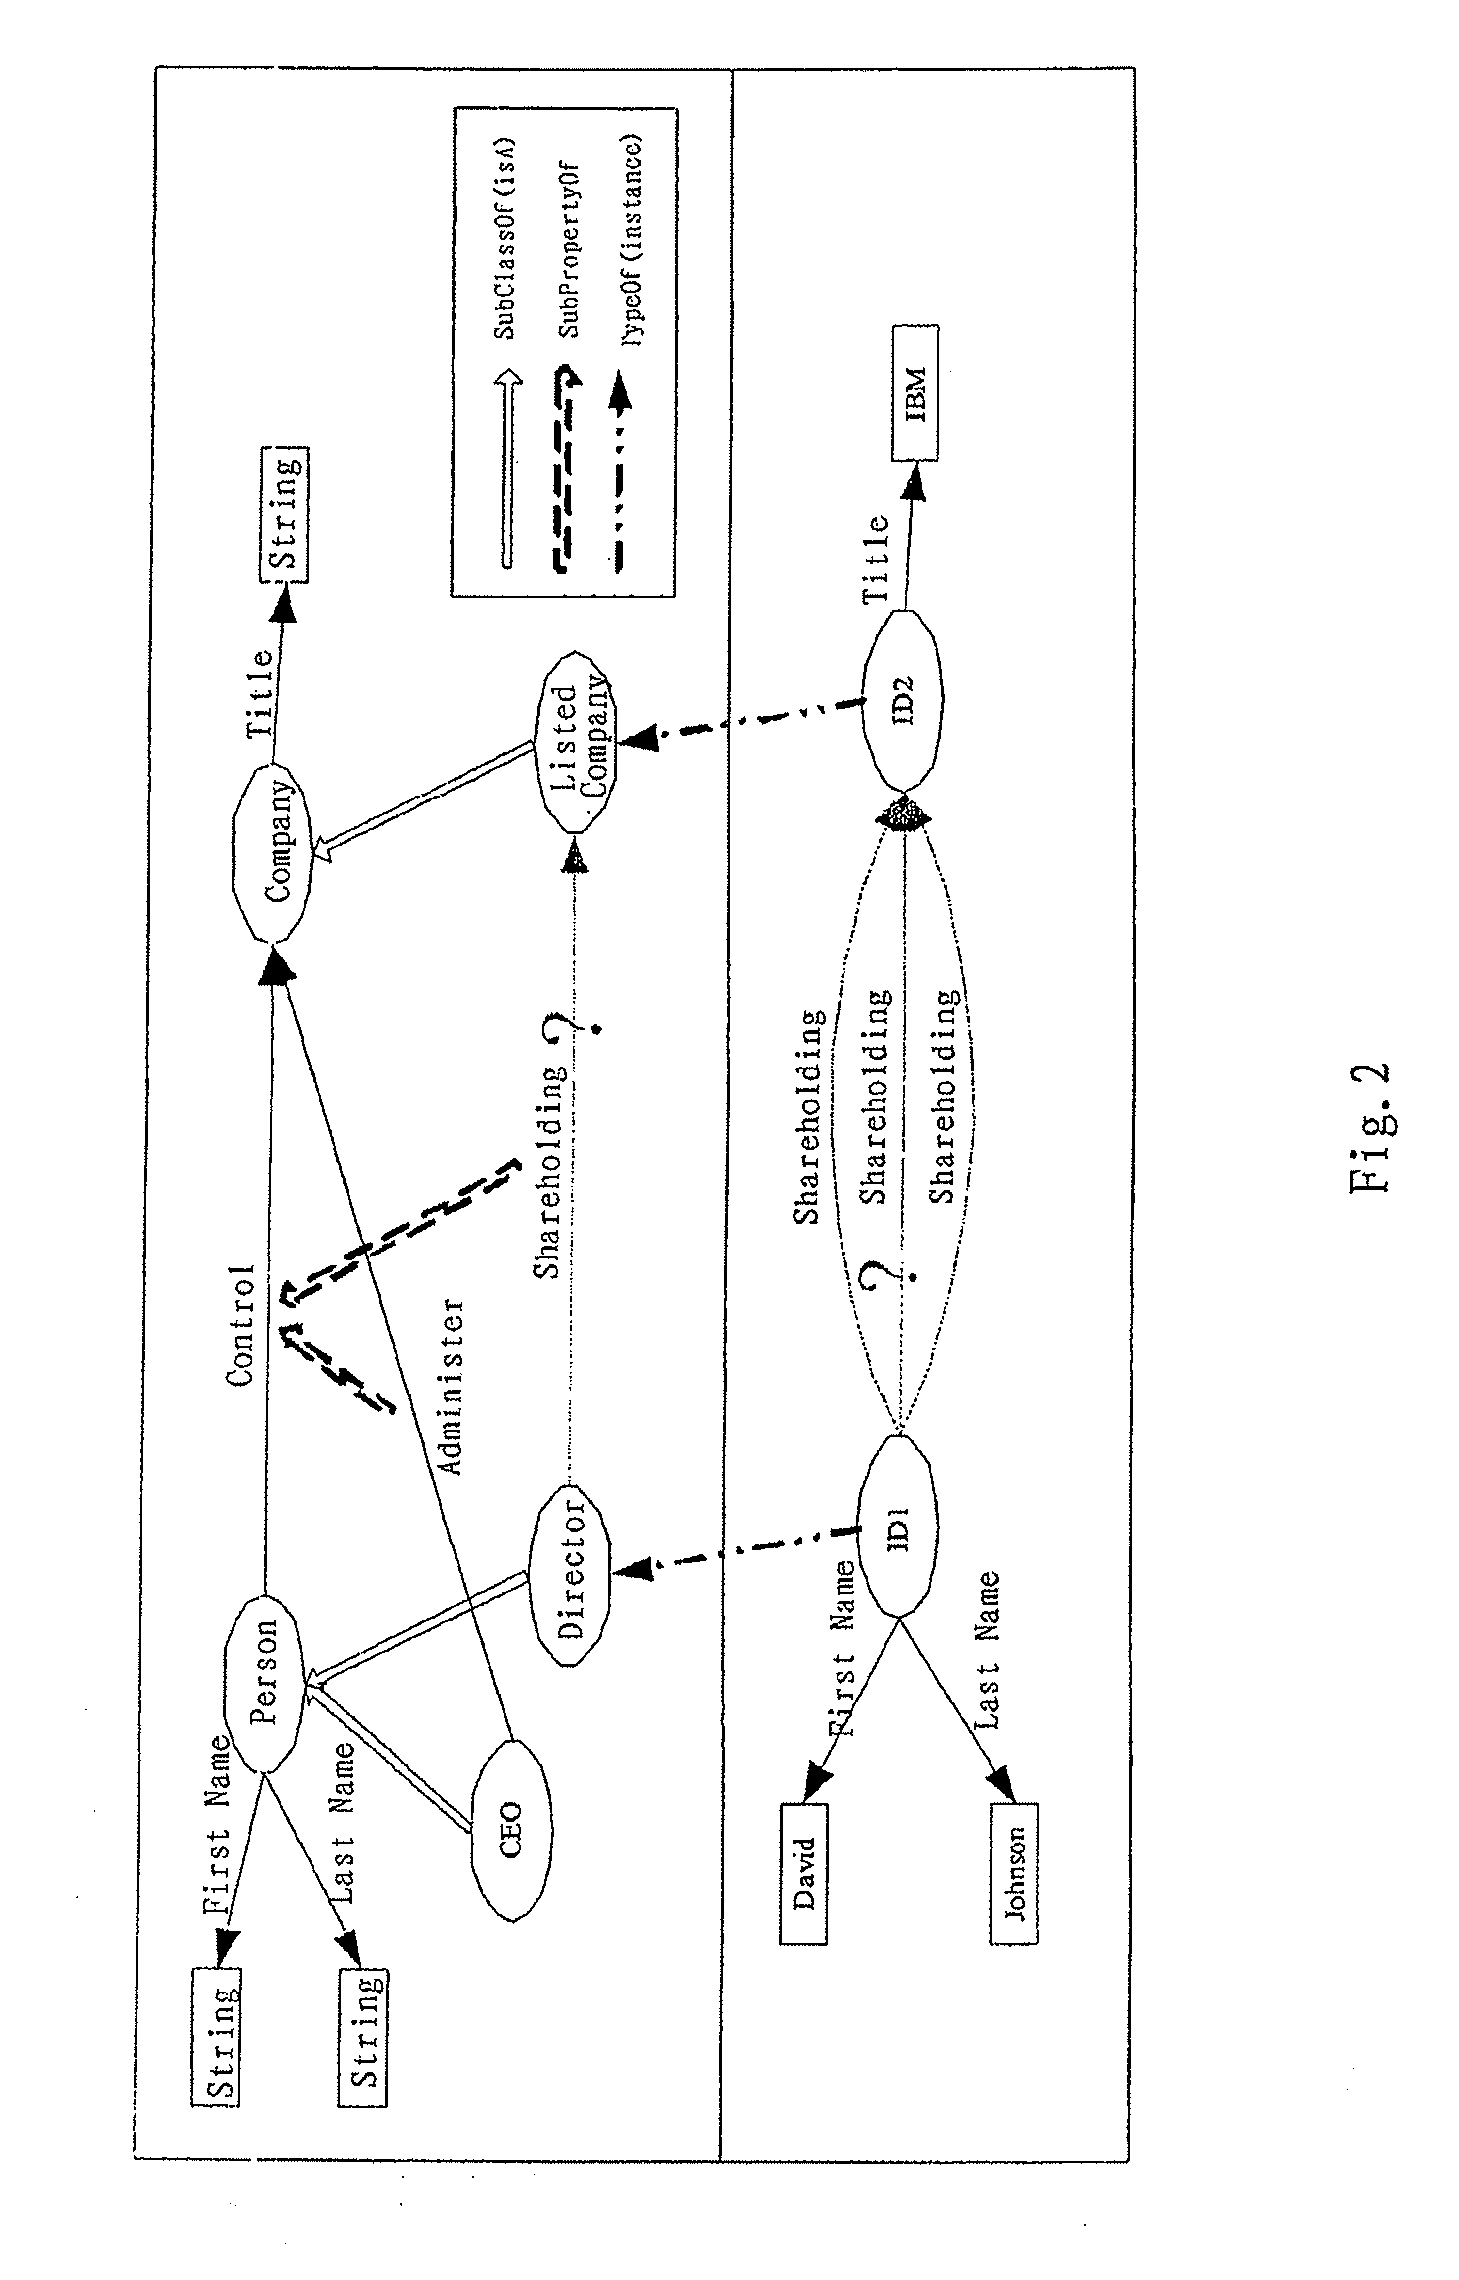 System and Method For Automatically Refining Ontology Within Specific Context